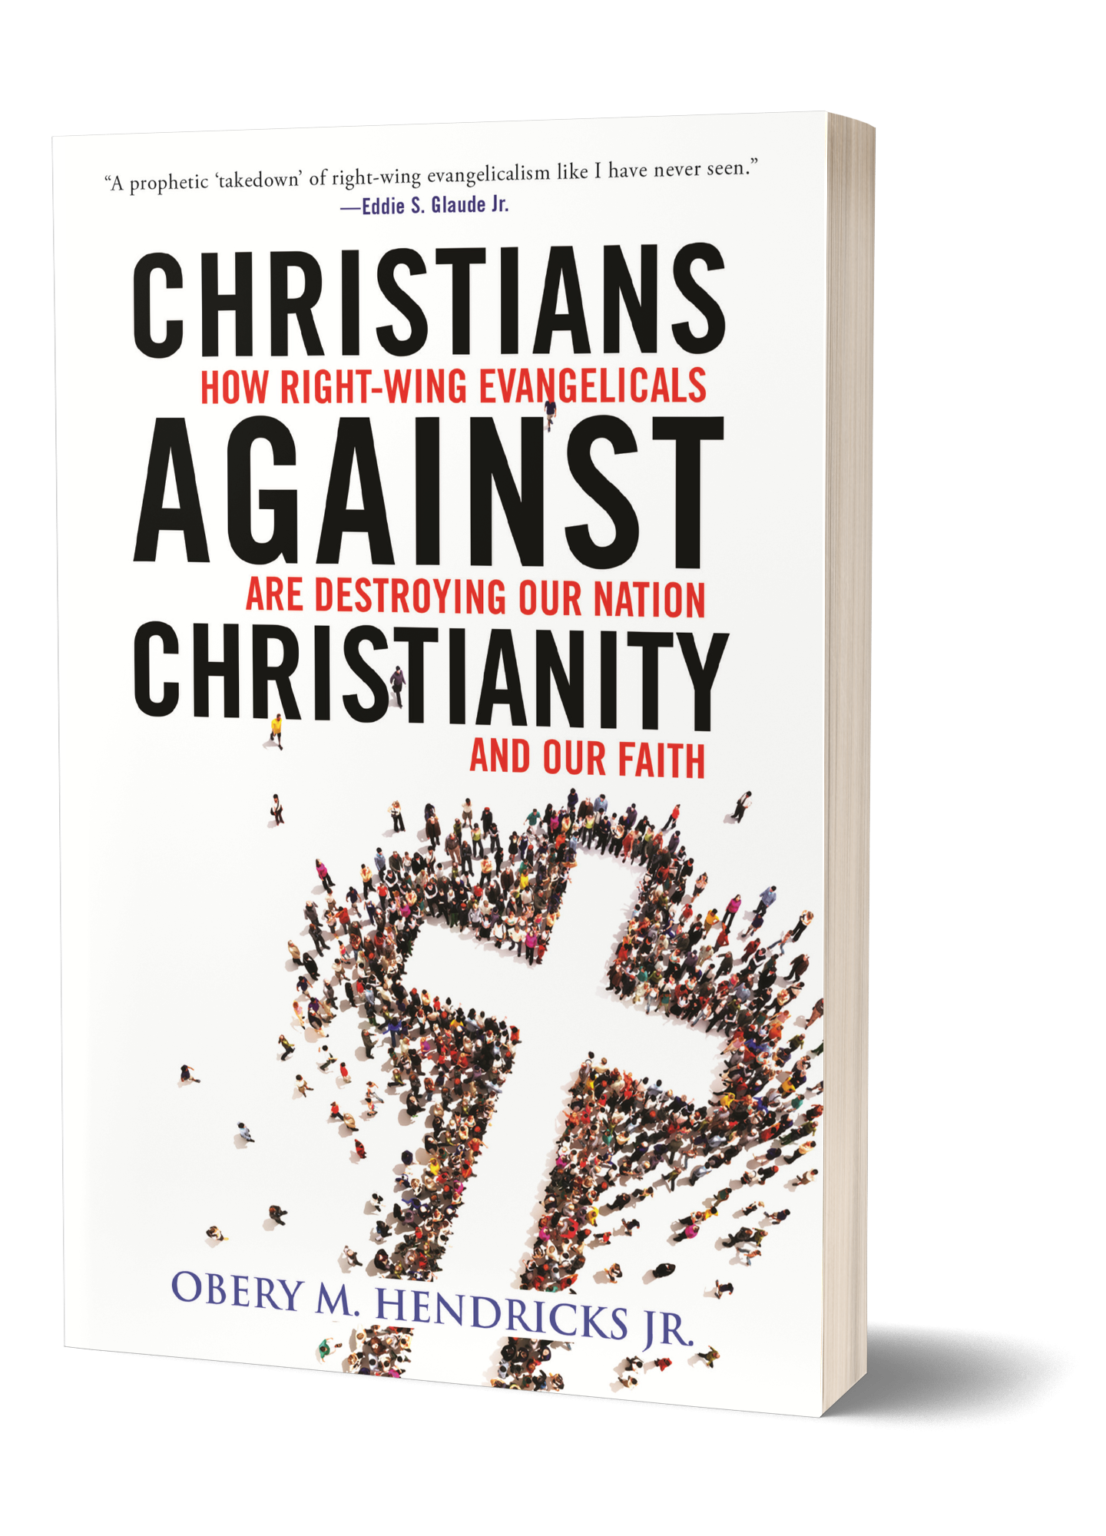 Christians Against Christianity by Obery Hendricks